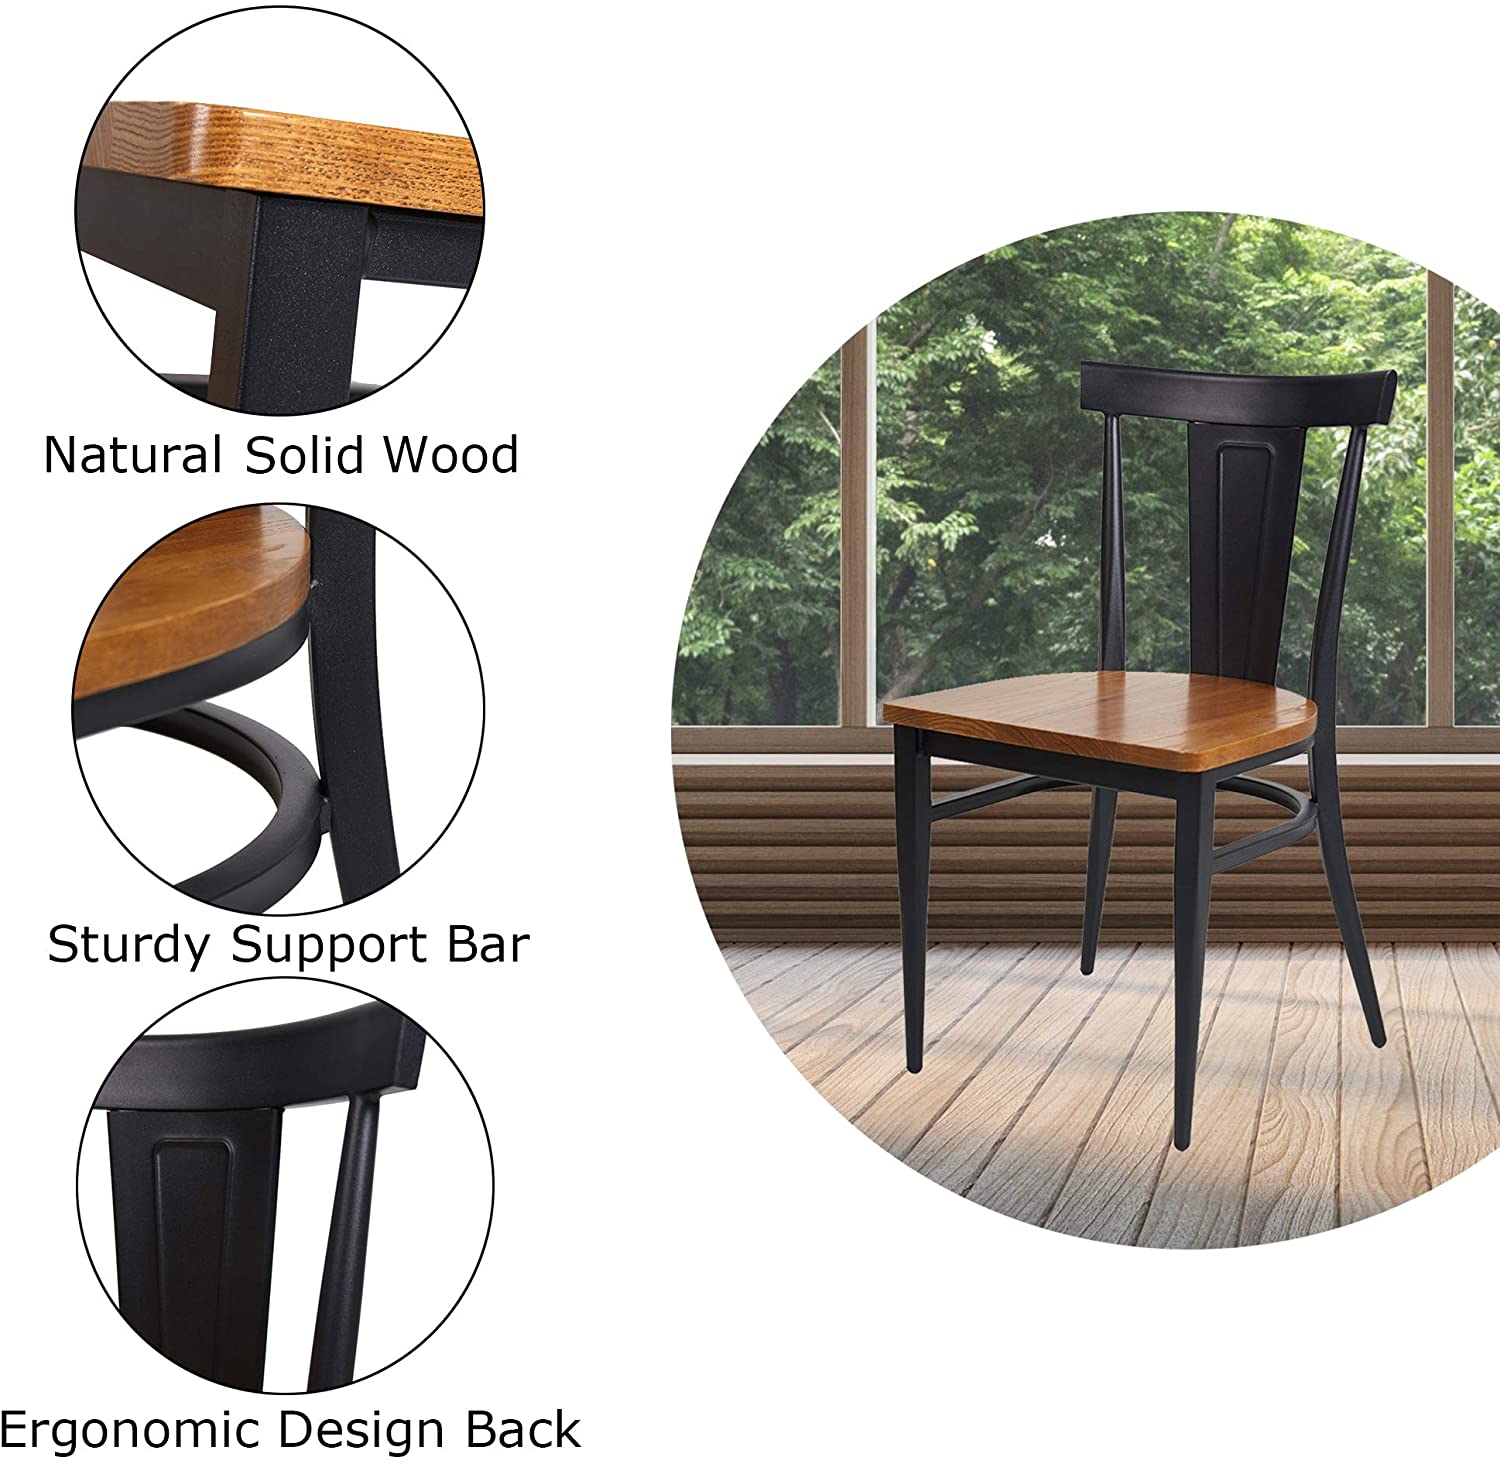 LUCKYERMORE Set of 2 Dining Room Side Chair Wood Kitchen Chairs with Metal Legs Fully Assembled, Black